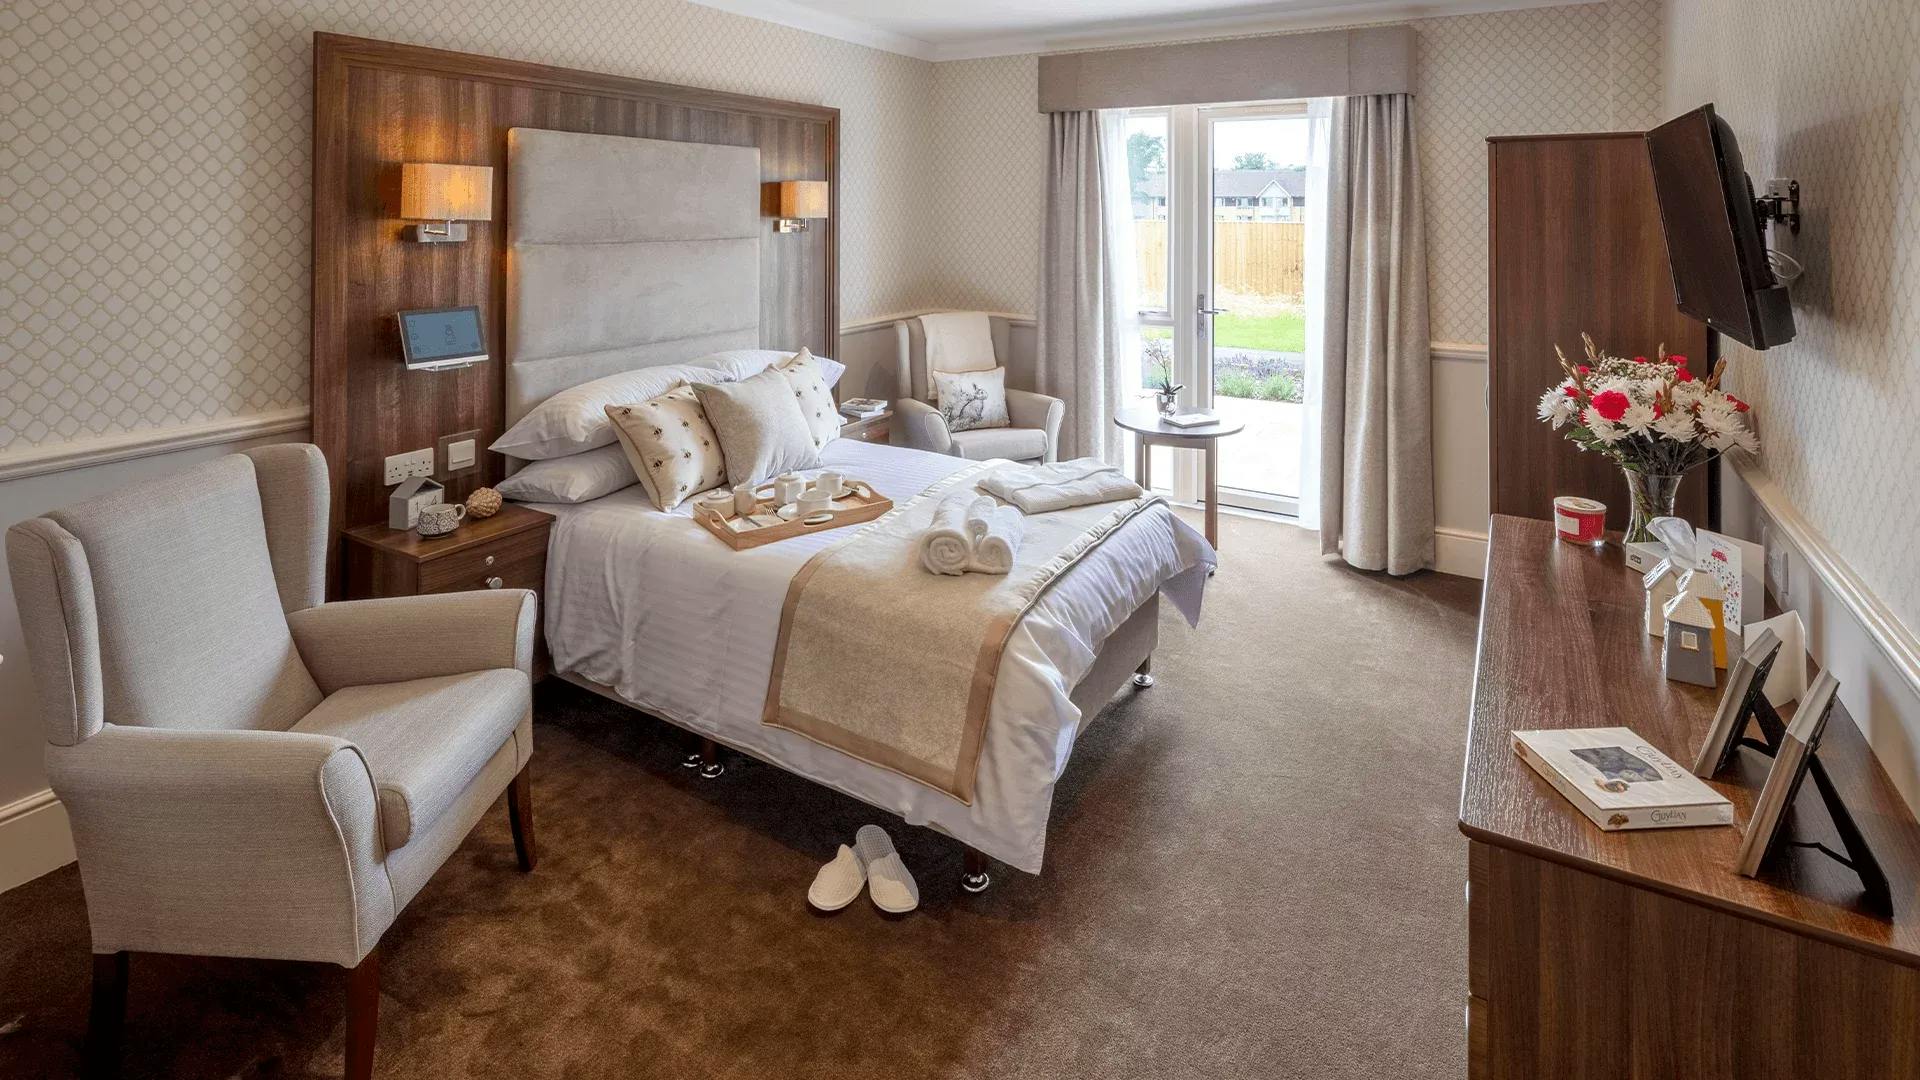 Bedroom of Butlers Mews Care Home in Rugby, Warwickshire